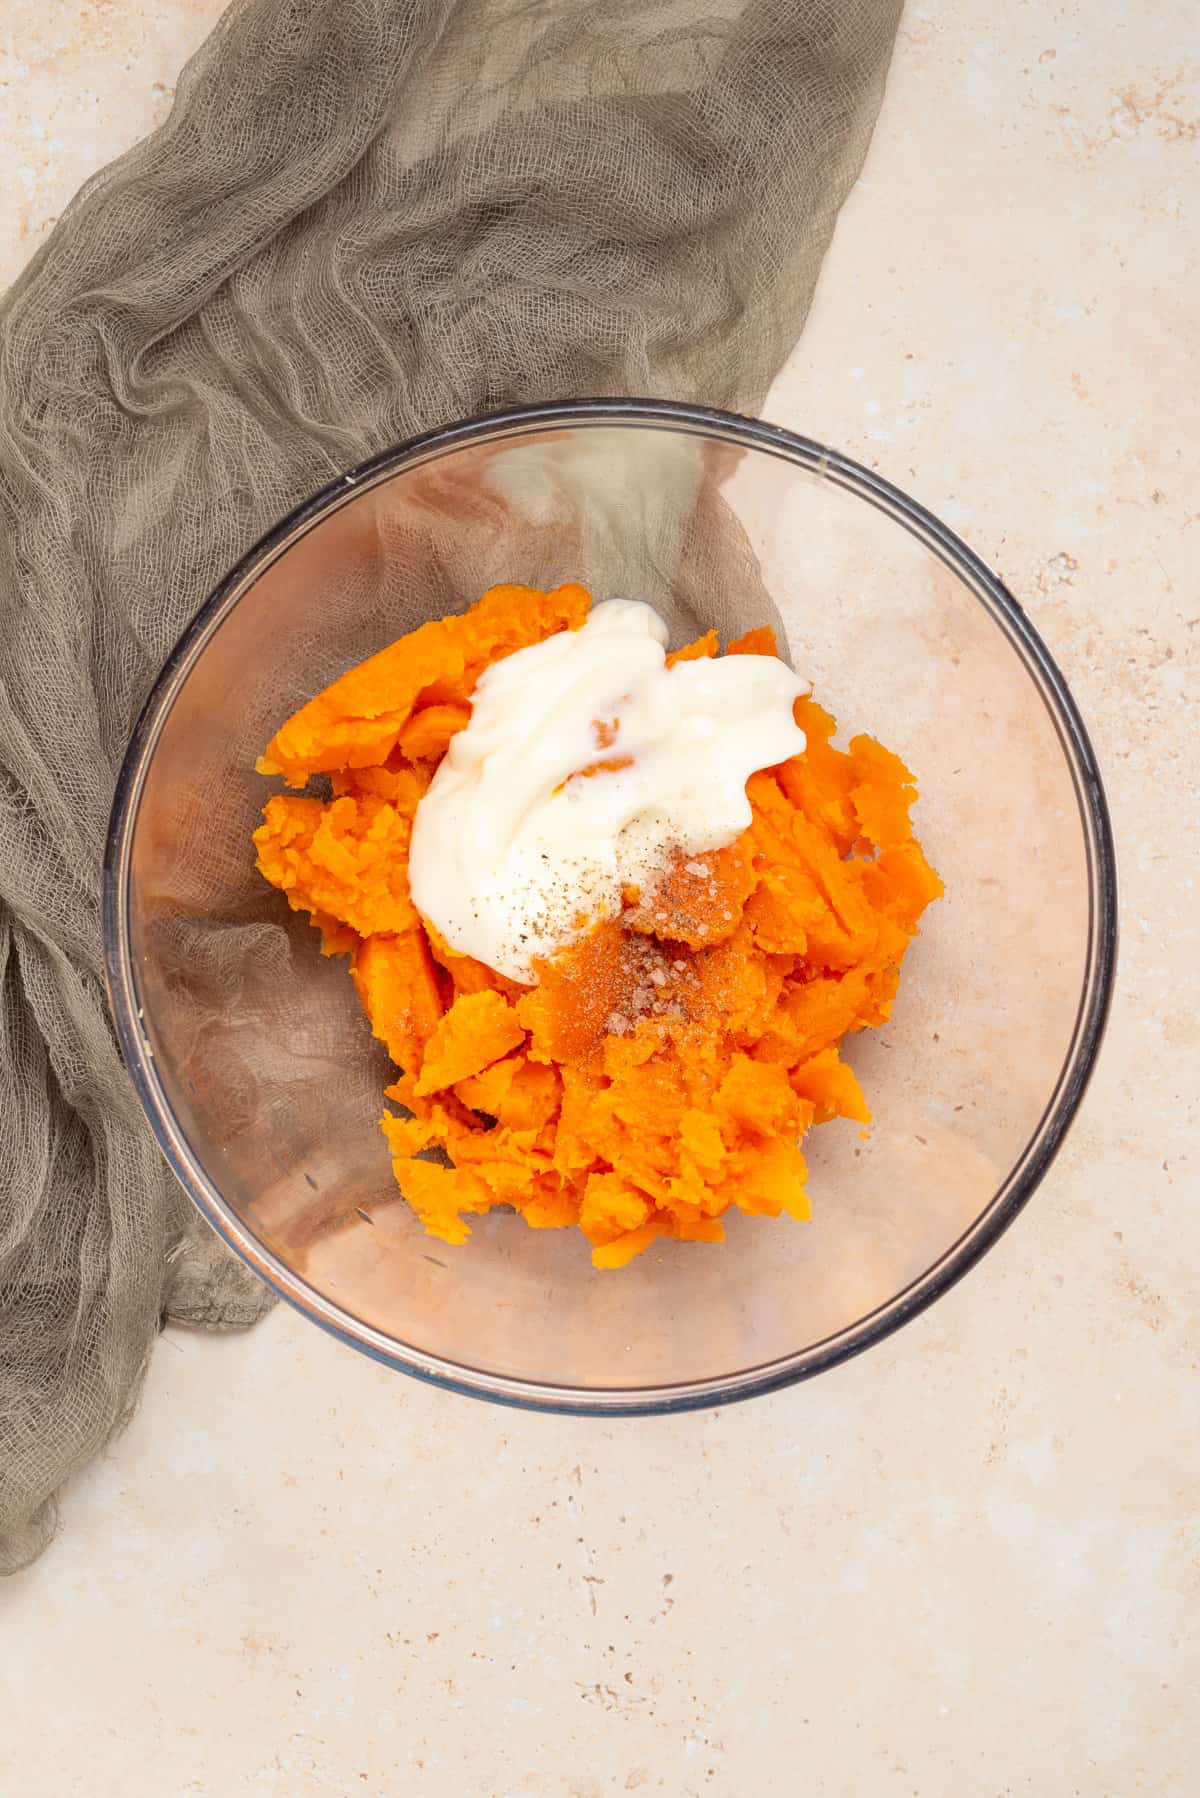 An image of sweet potato flesh, sour cream, salt, and pepper in a mixing bowl.